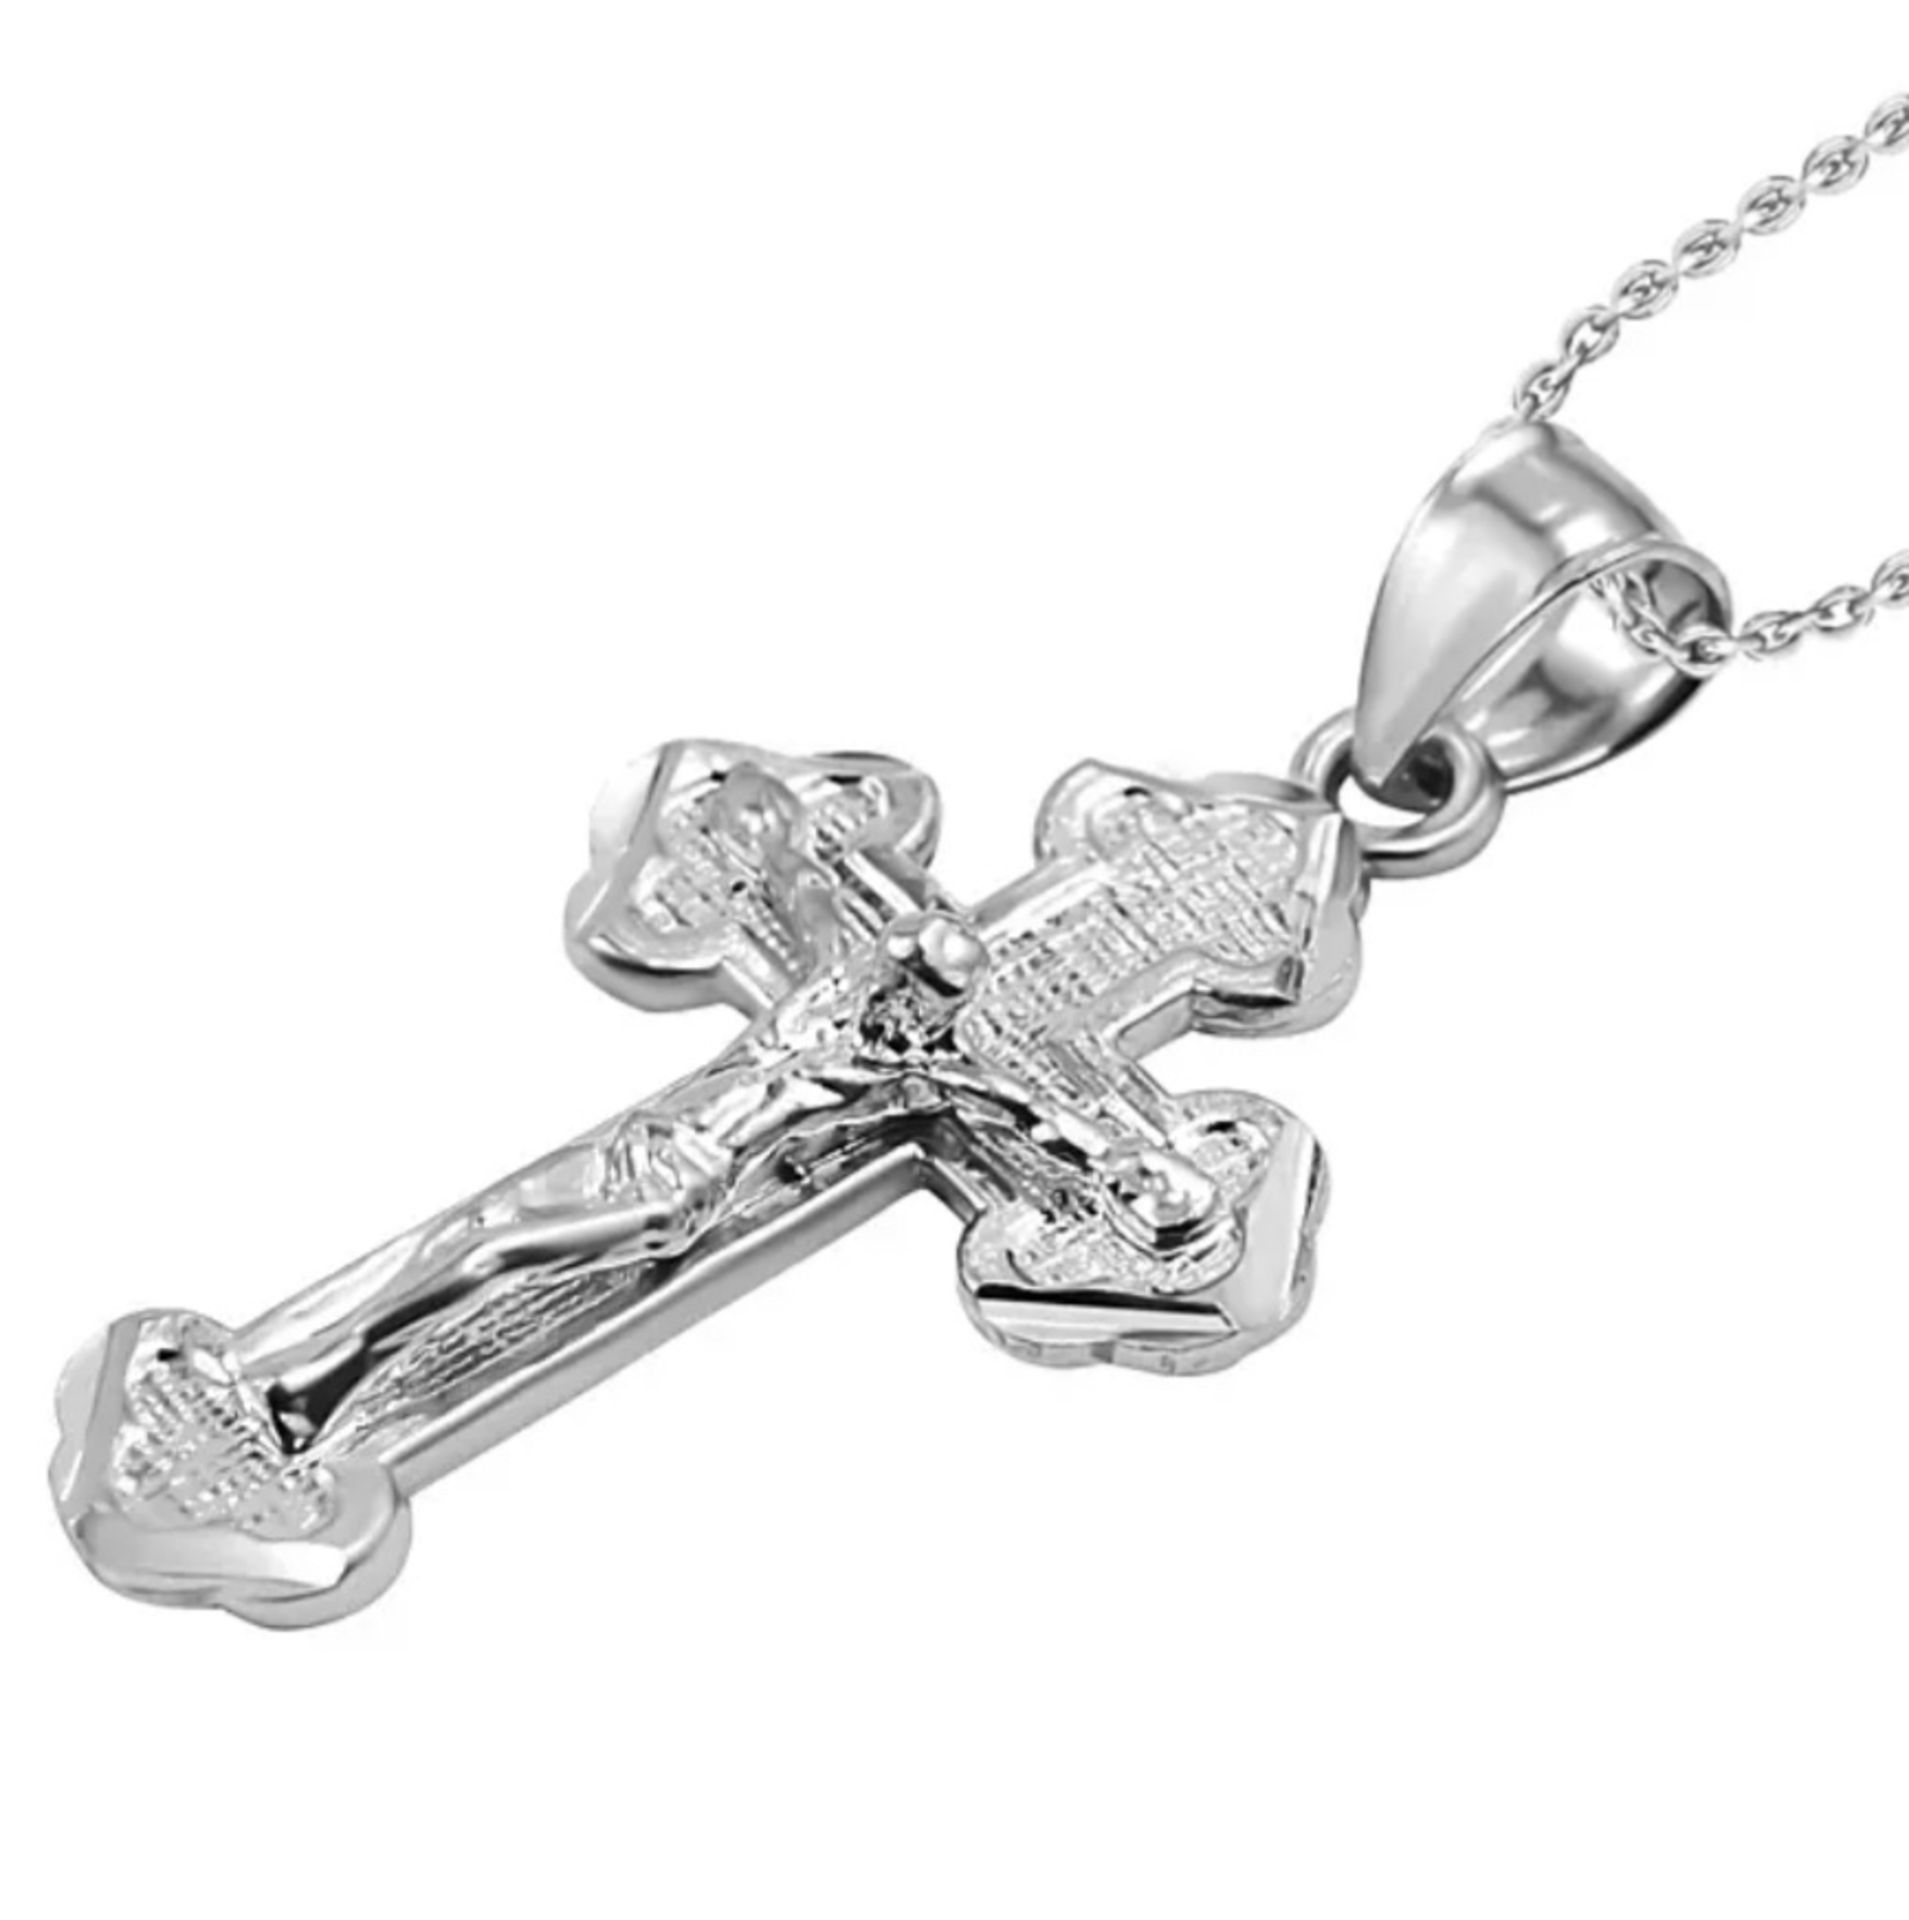 New! Sterling Silver Cross Pendant with Chain - Image 4 of 5